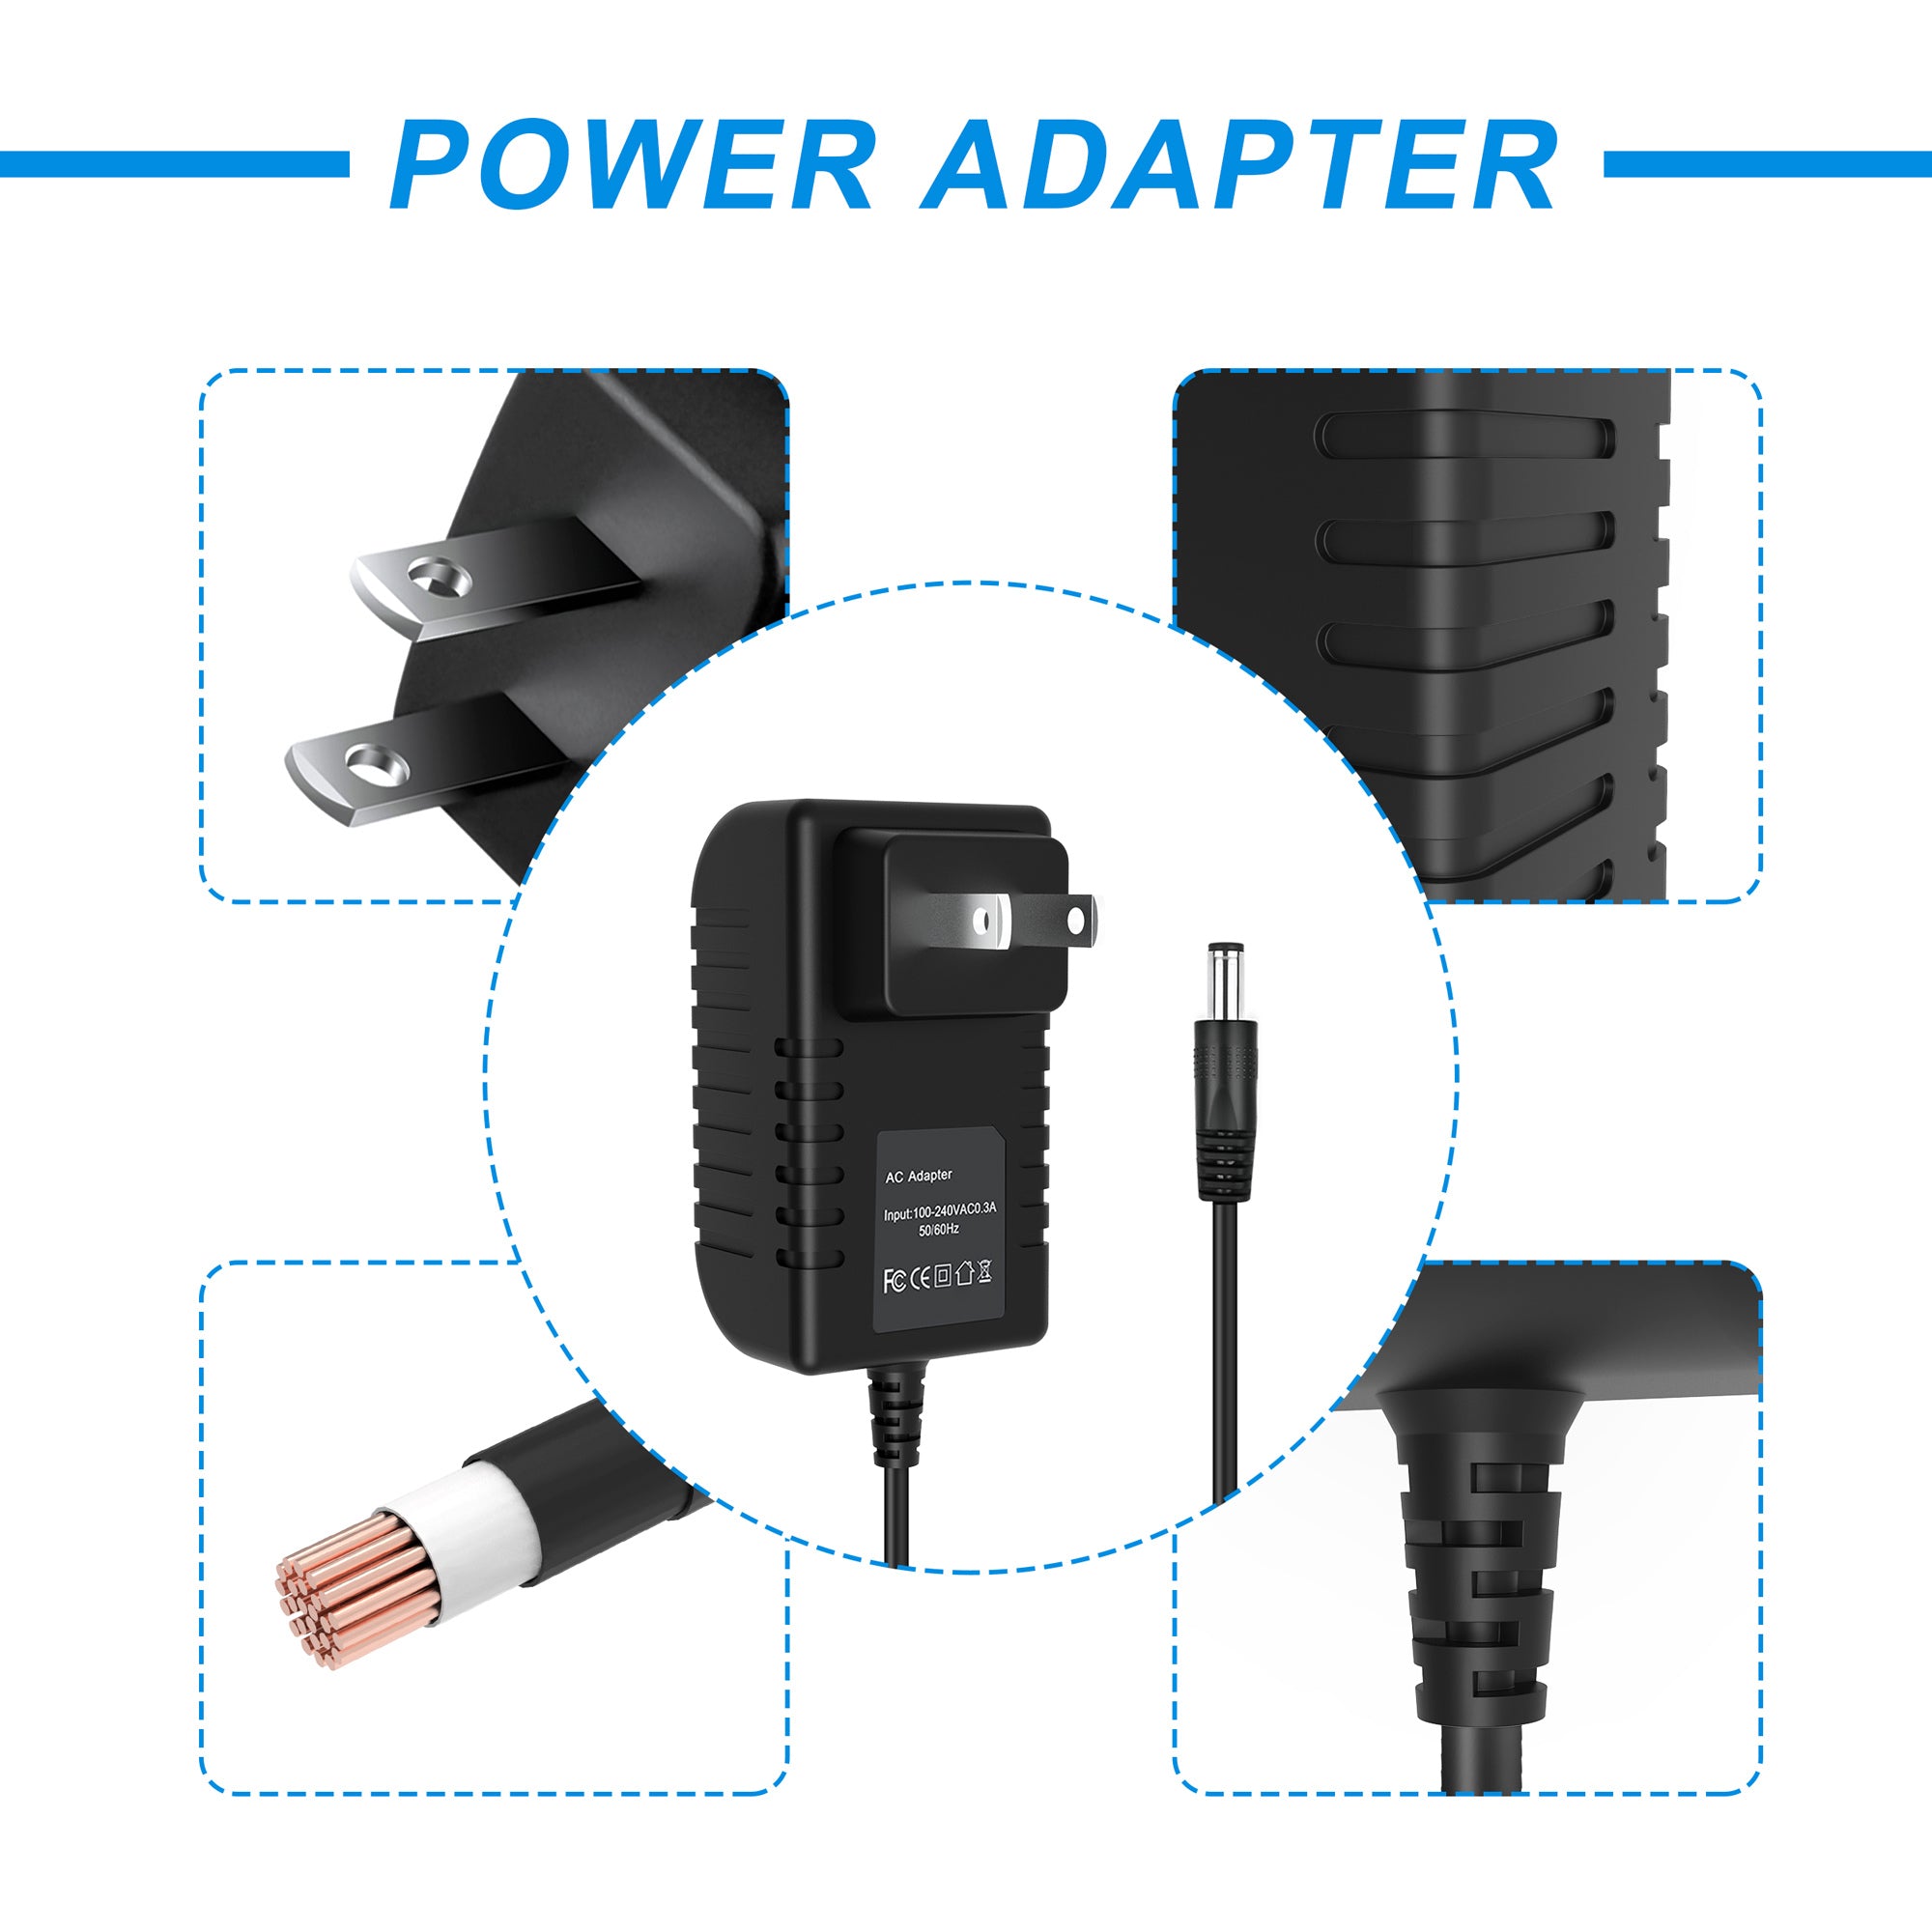 AbleGrid 6V 2A AC/DC Adapter Charger Cord Compatible with Kids , Spiderman, Avengers, Viper, I8 Concept Ride On Car Battery Wall Barrel Plug